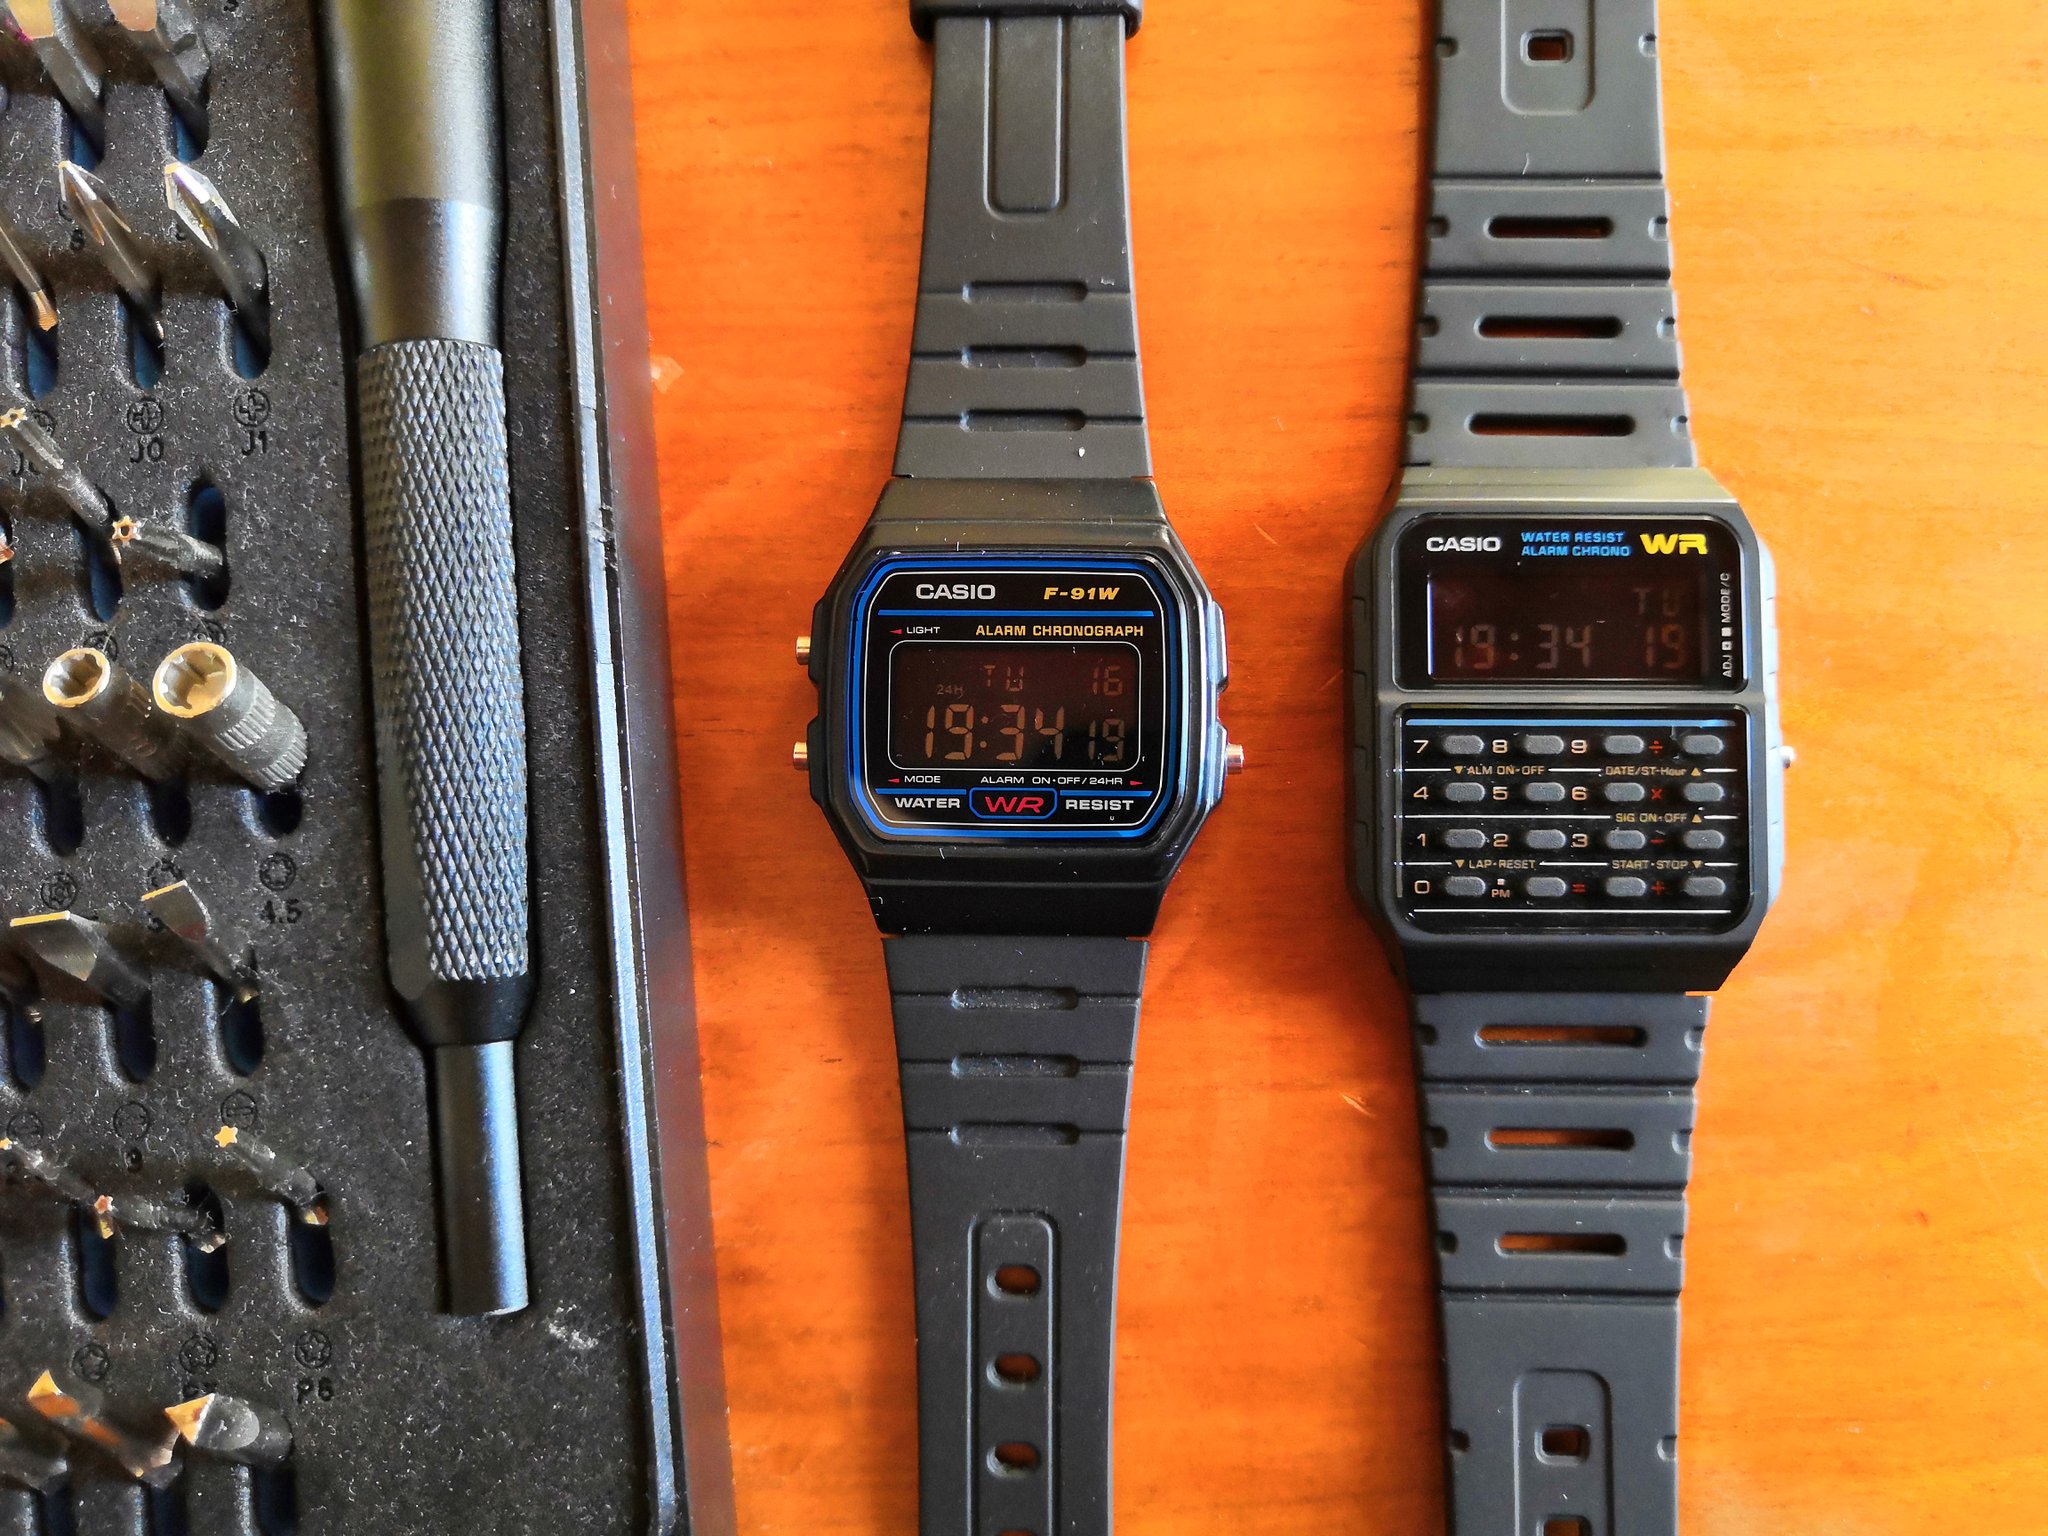 Jean Doe (Oyk=) on Twitter: "Modded my new Casio CA-53W watch today! (the one on the right) love inverted screen on Casio watches 😍 / Twitter